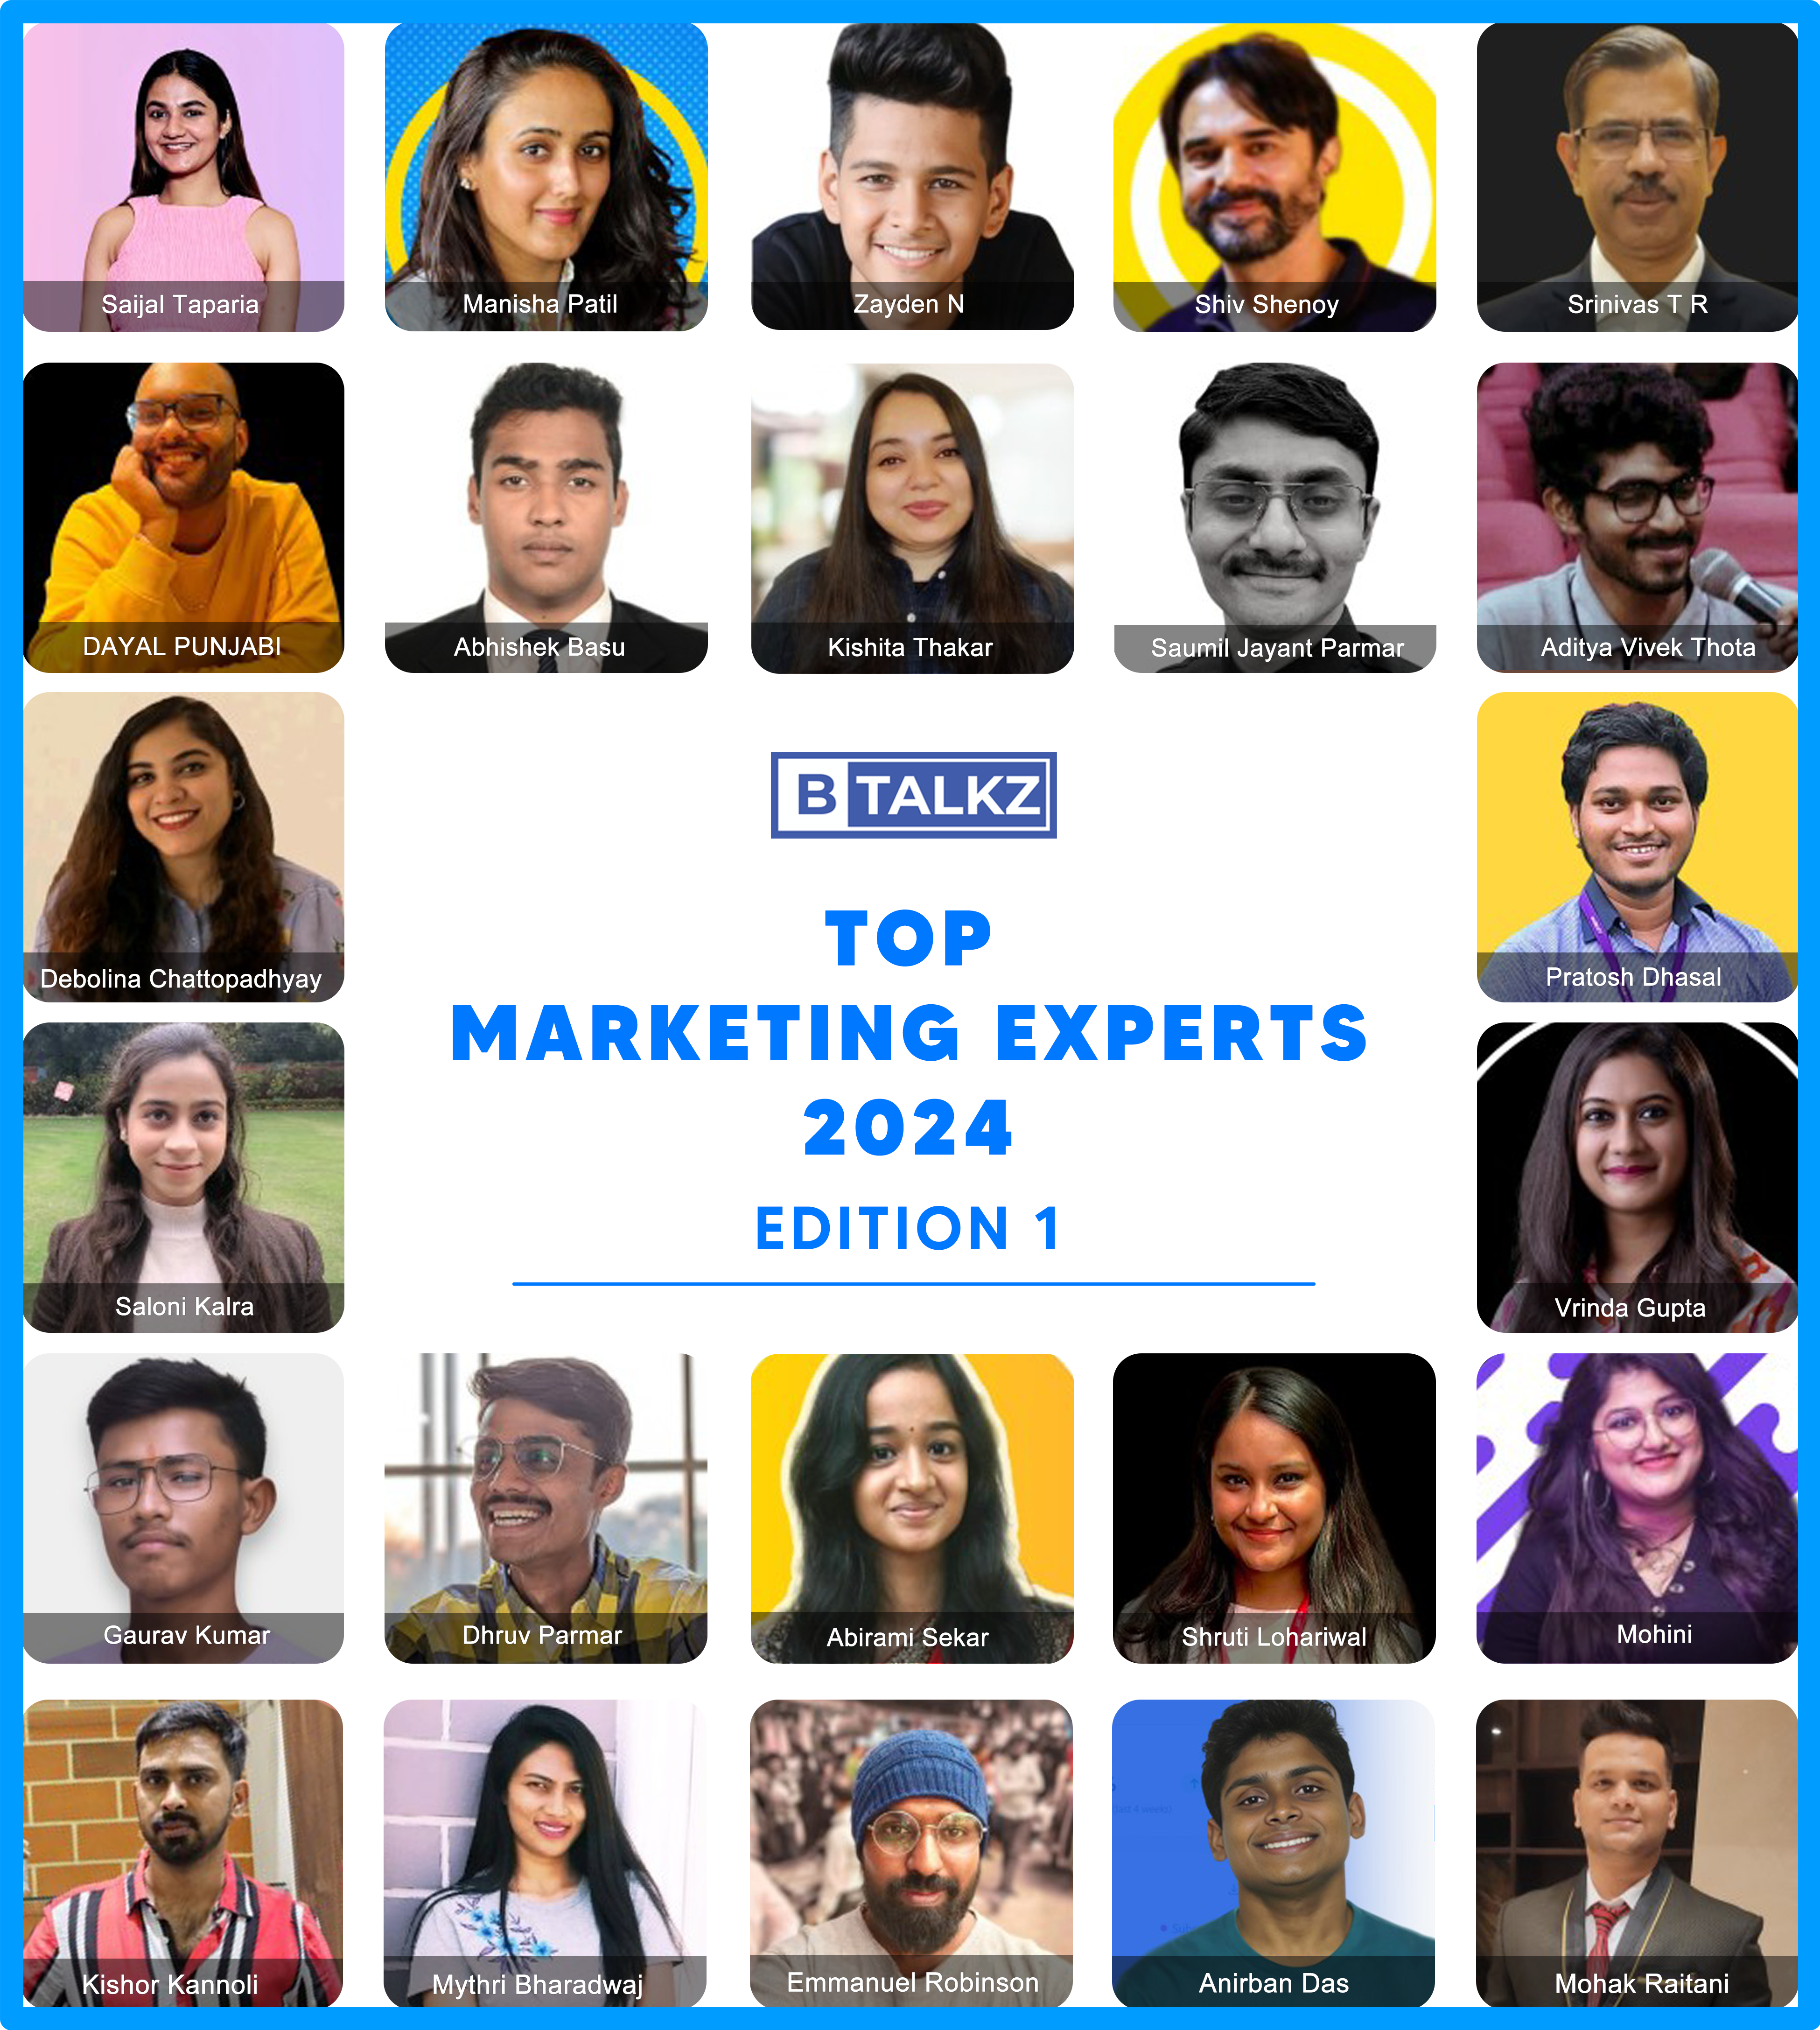 Top Marketing Experts 2024